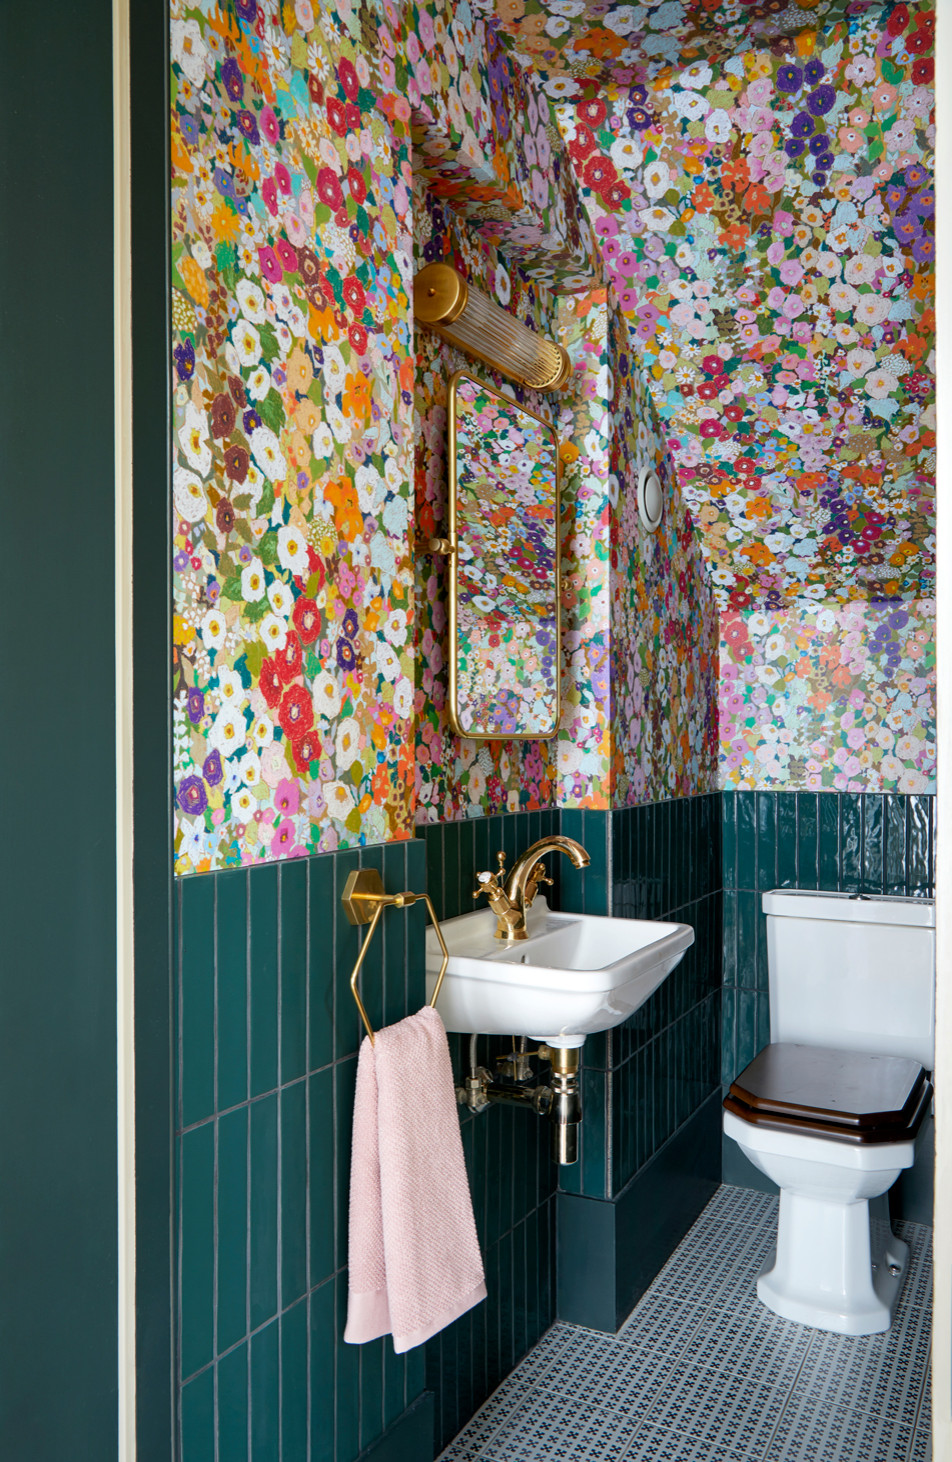 62+Bathroom Wallpaper Ideas (NEUTRAL & COLORFUL) - Wallpapers